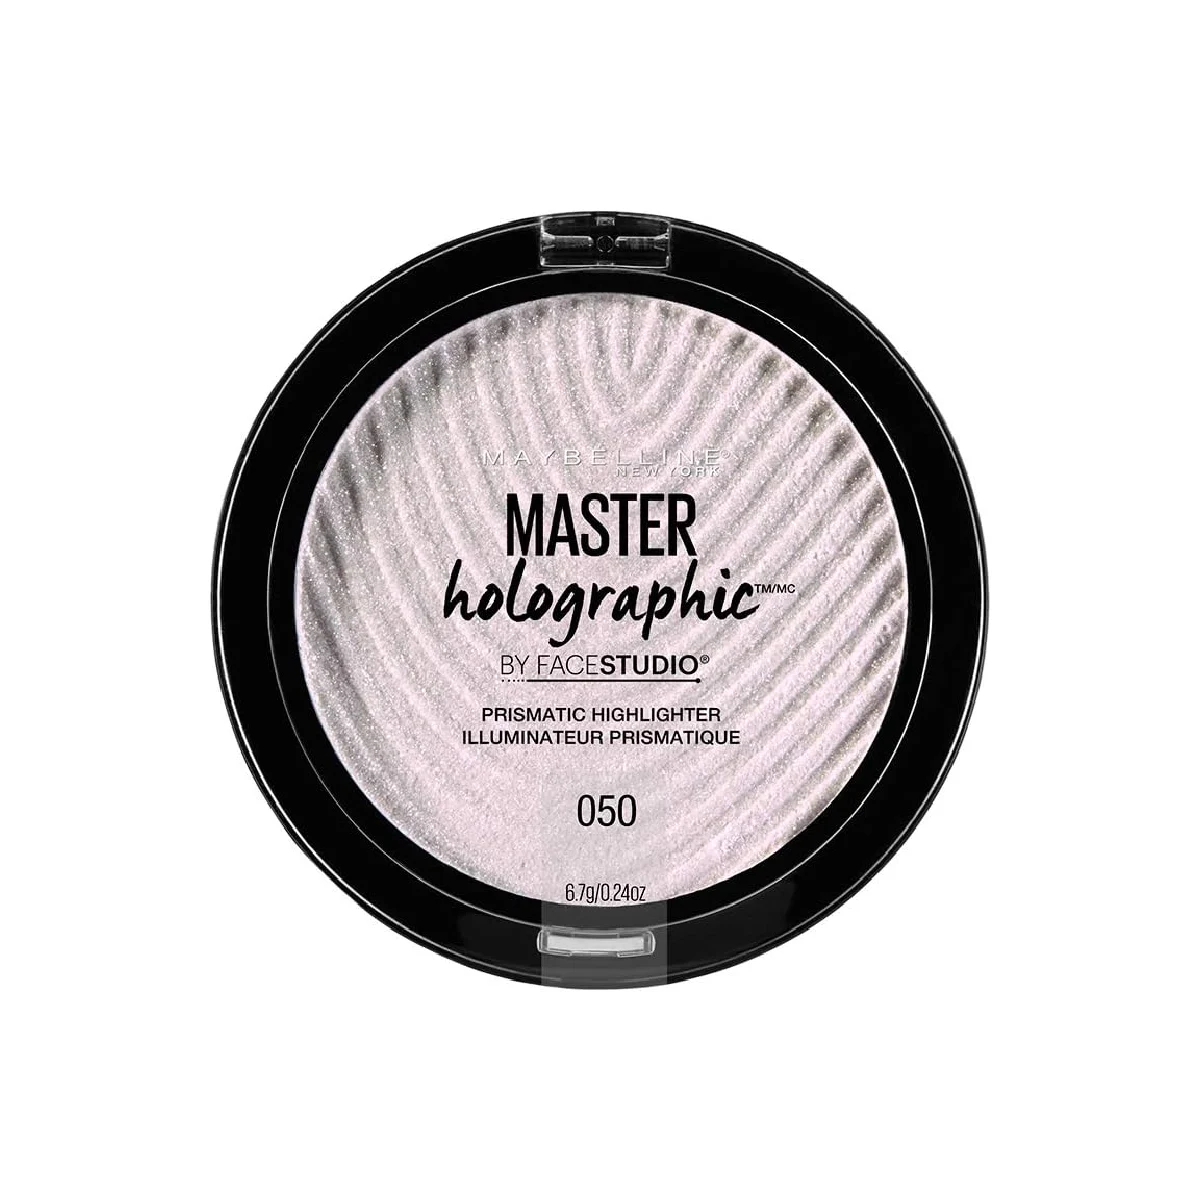 Maybelline New York Facestudio Master Holographic Prismatic Highlighter Makeup - highlighter compact against a white background.